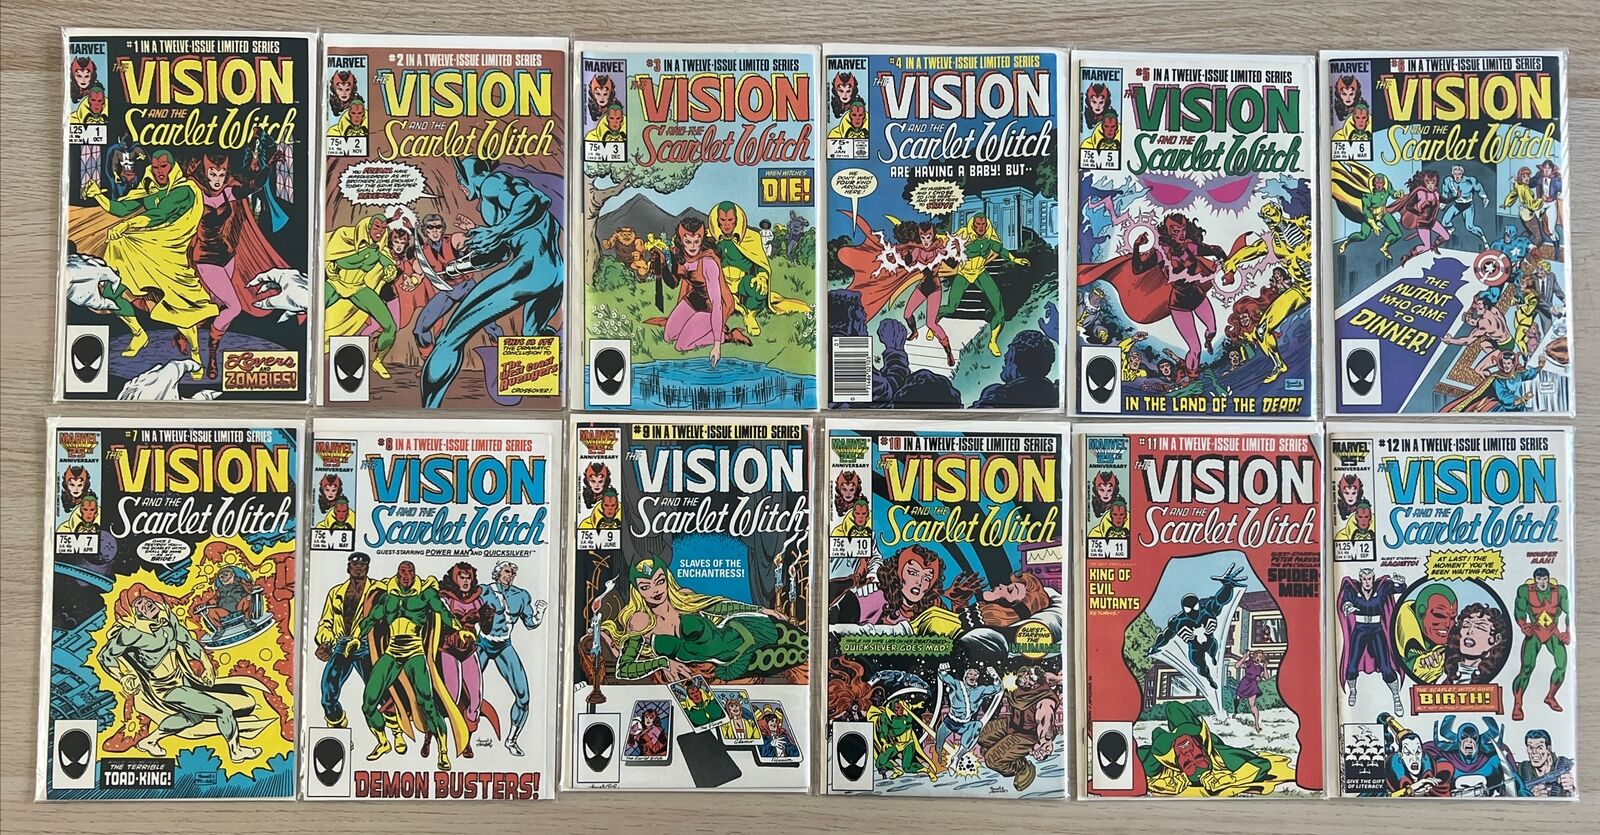 The Vision and The Scarlet Witch #1-12 - Marvel Comics